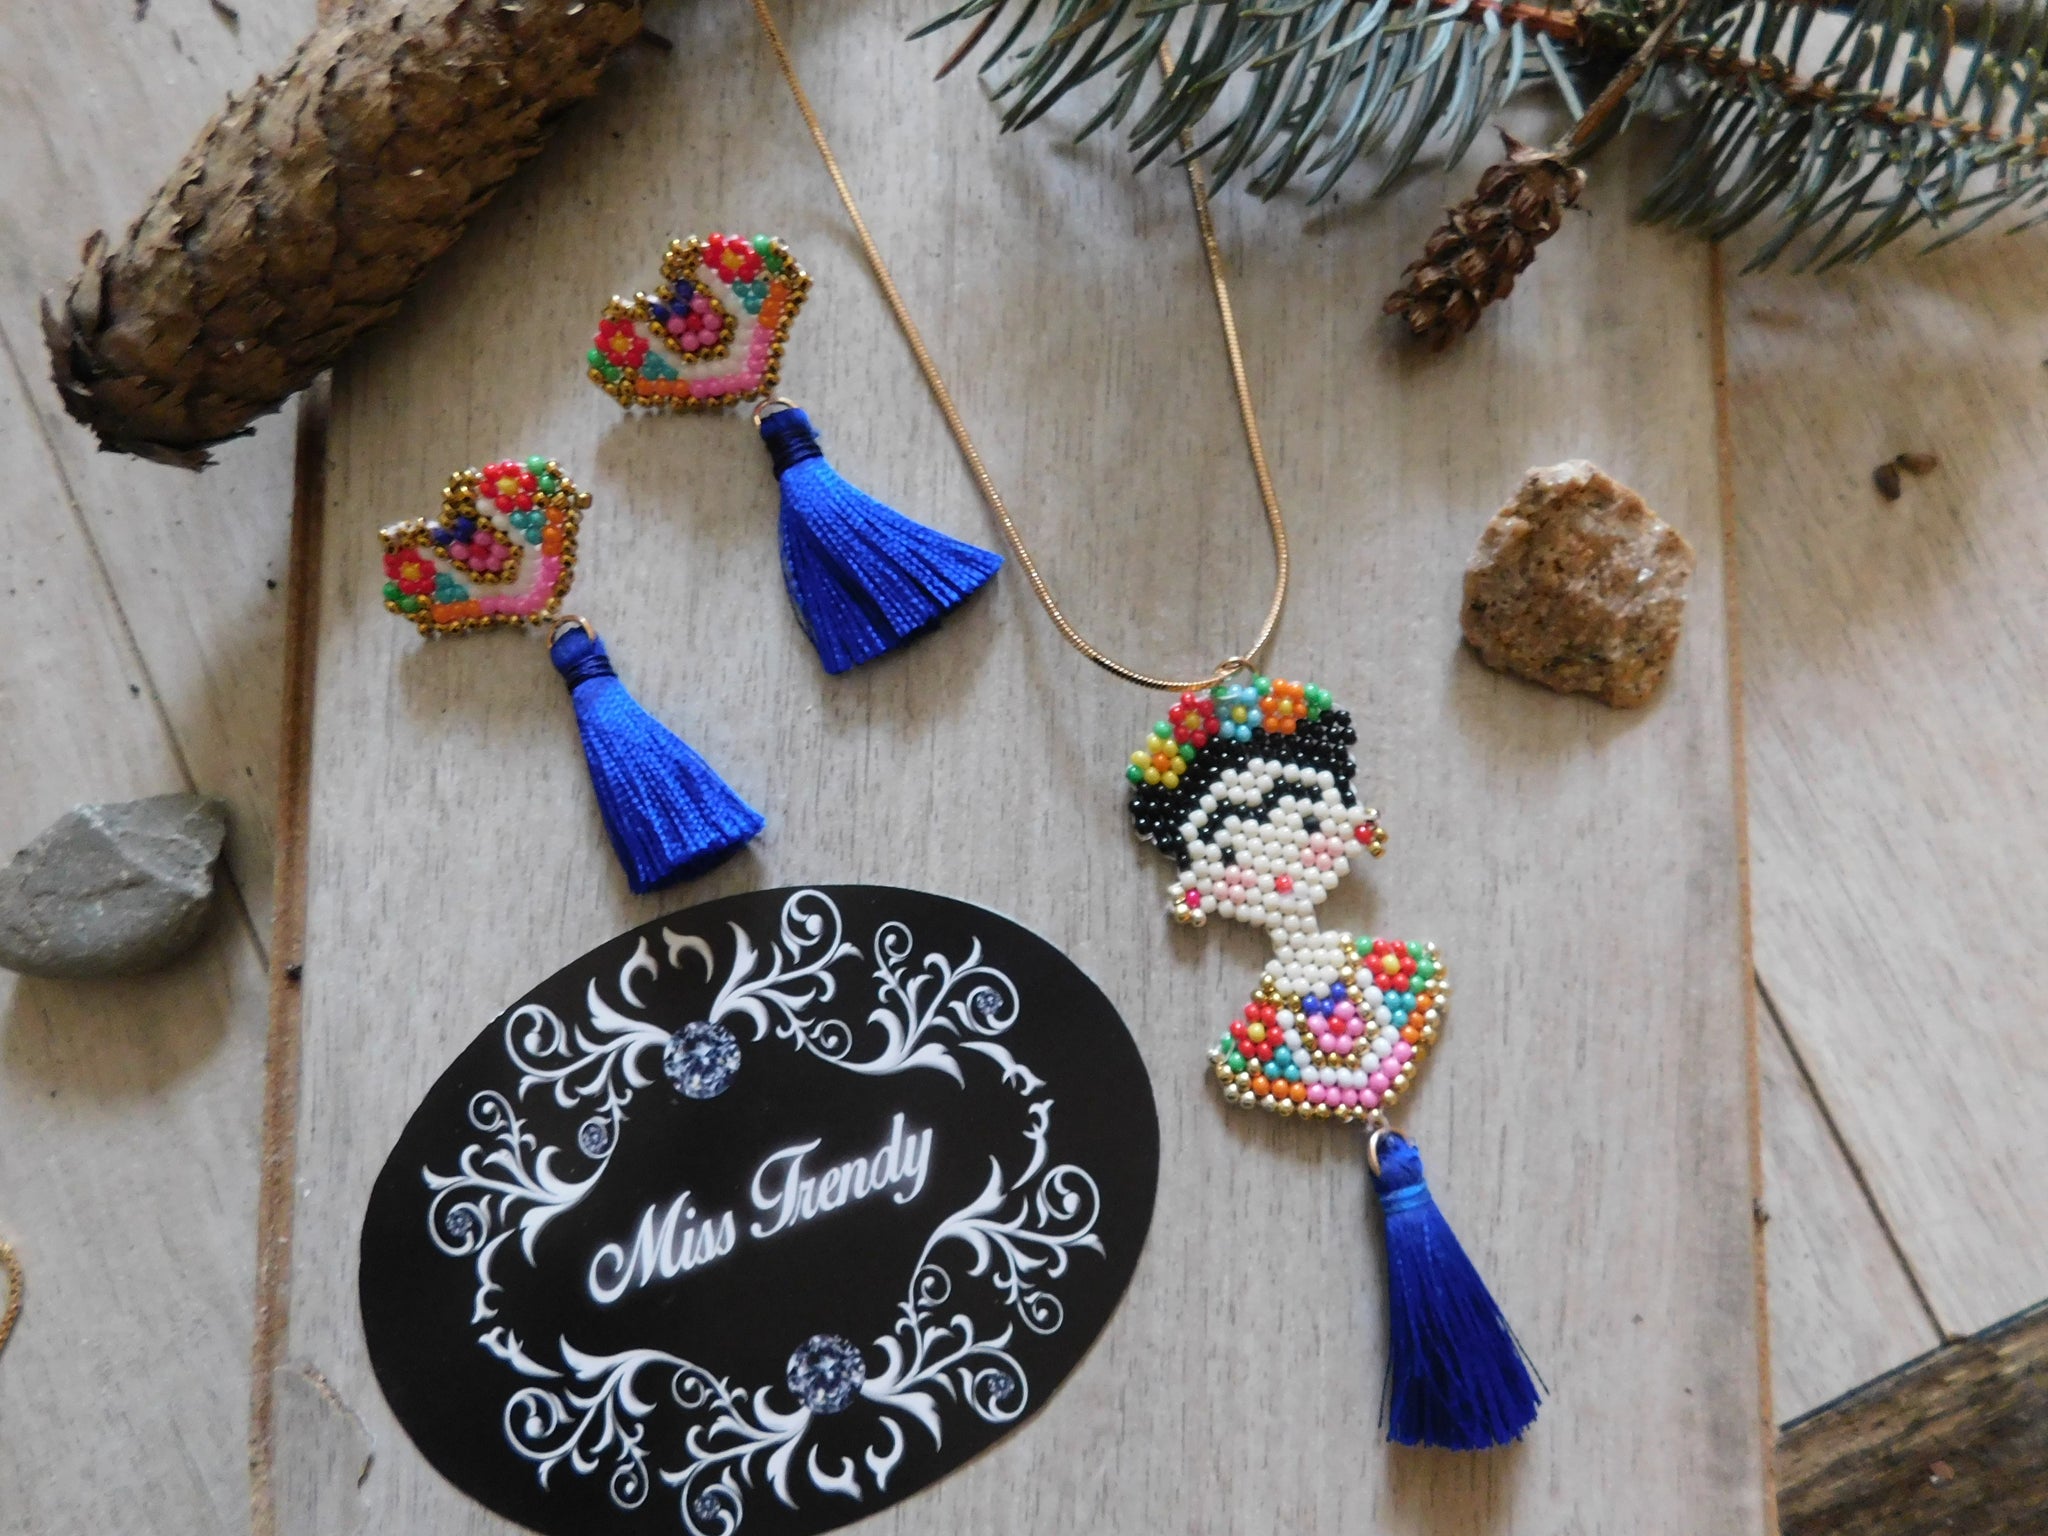 Frida Kahlo Accessories for Sale